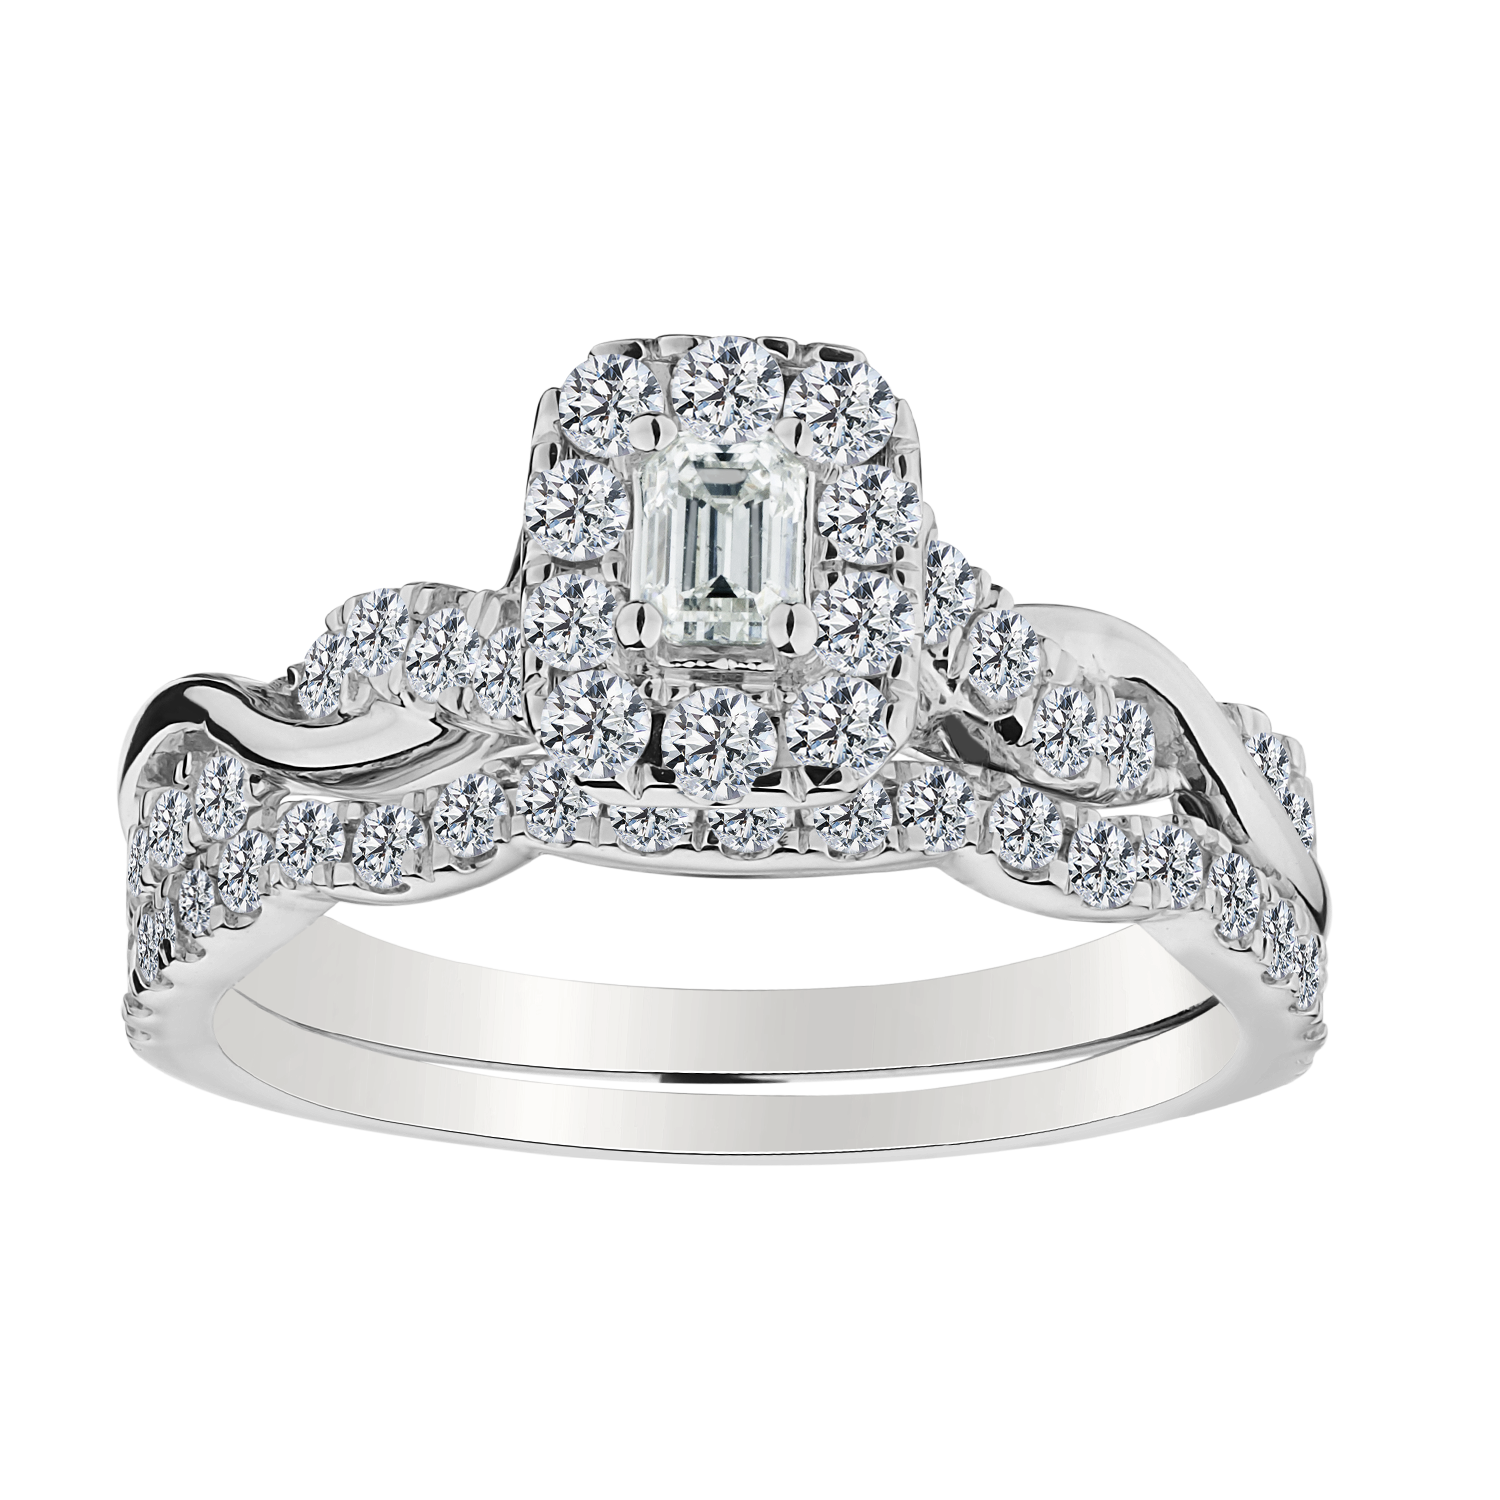 .20 Carat Emerald Cut Centre,  1.00 Carat Total Diamond Weight Ring Set.  14kt White Gold. Griffin Jewellery Designs